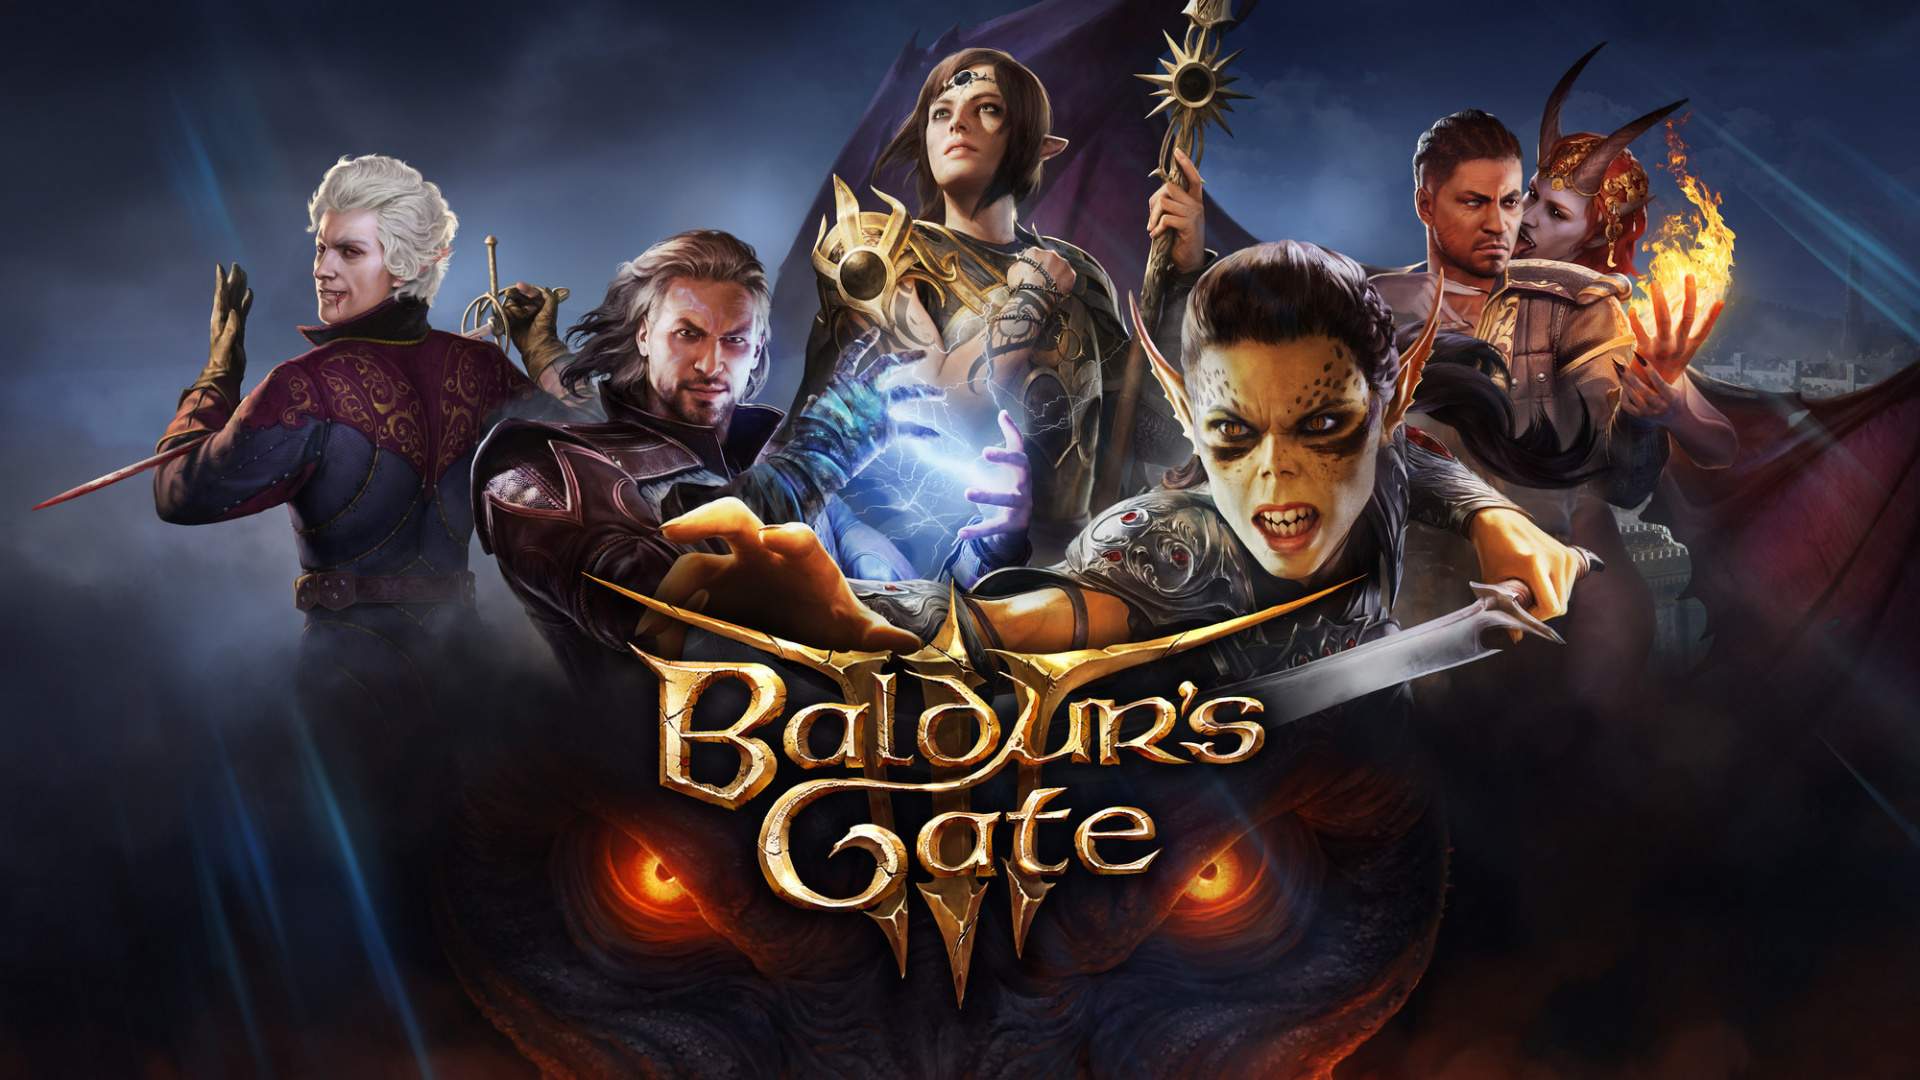 How To Get All Companions In Baldurs Gate 3